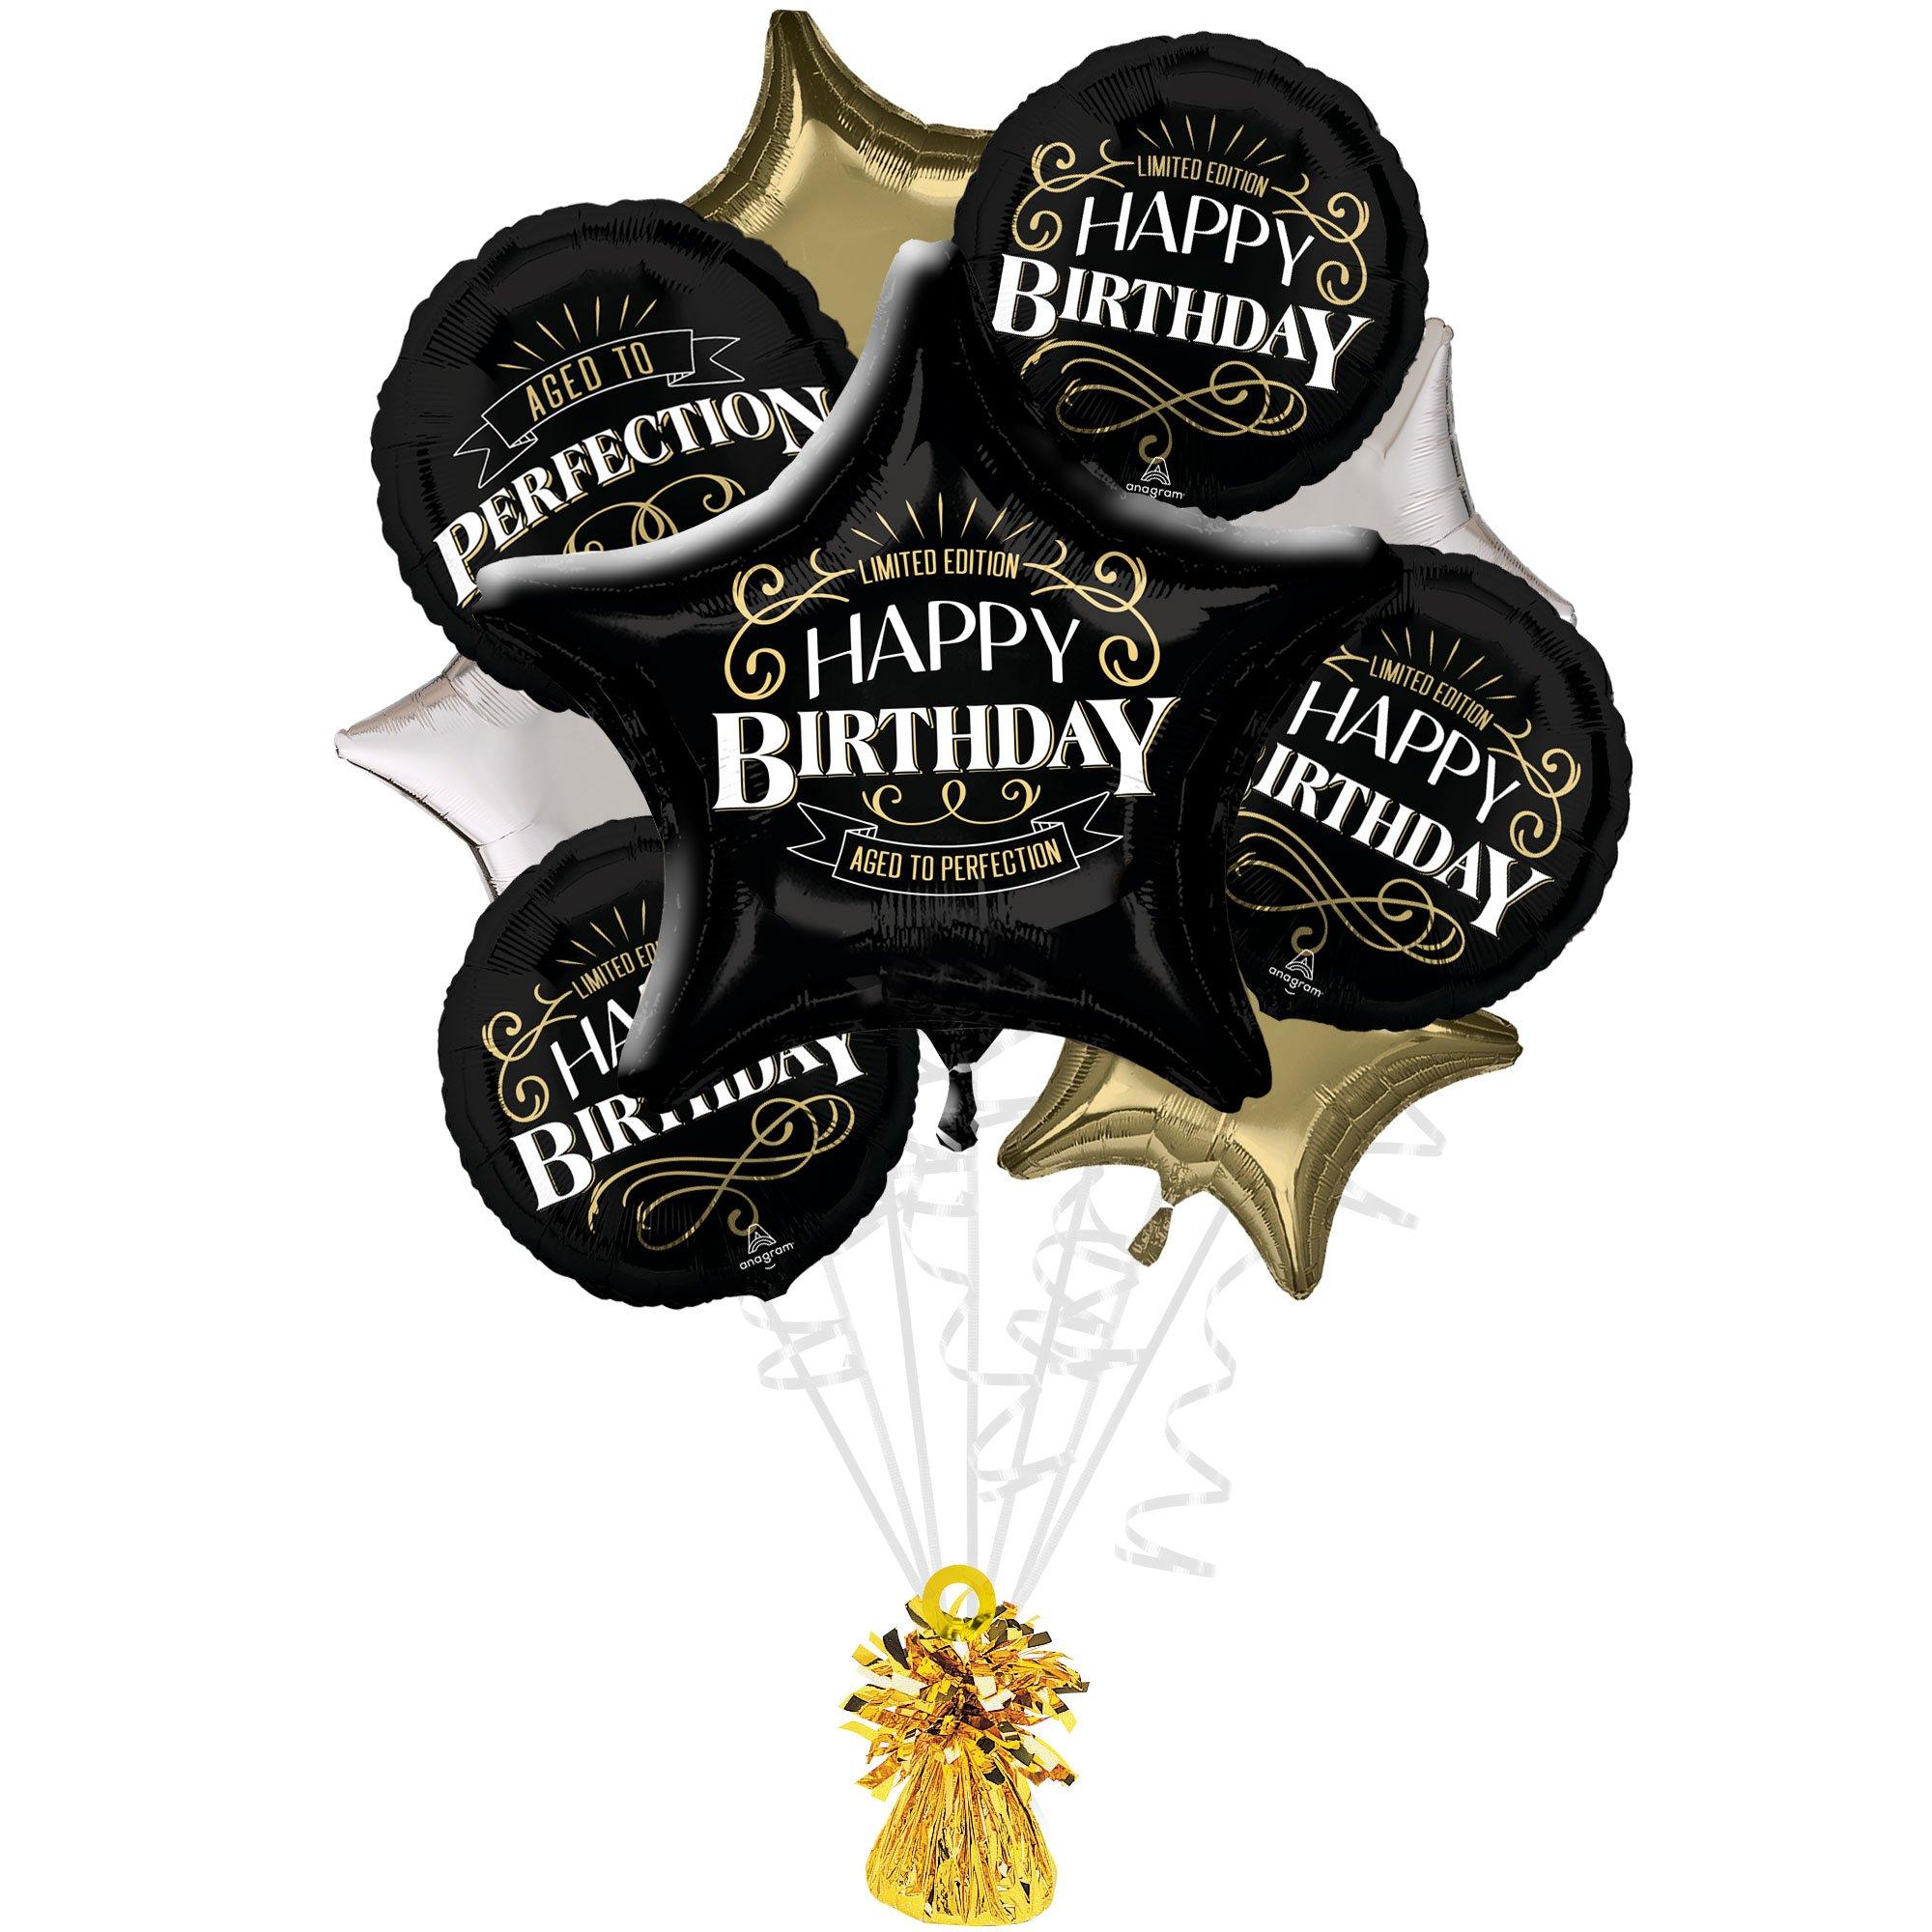 Foil Balloons Weight Small Black for Balloons Delivery - Balloon